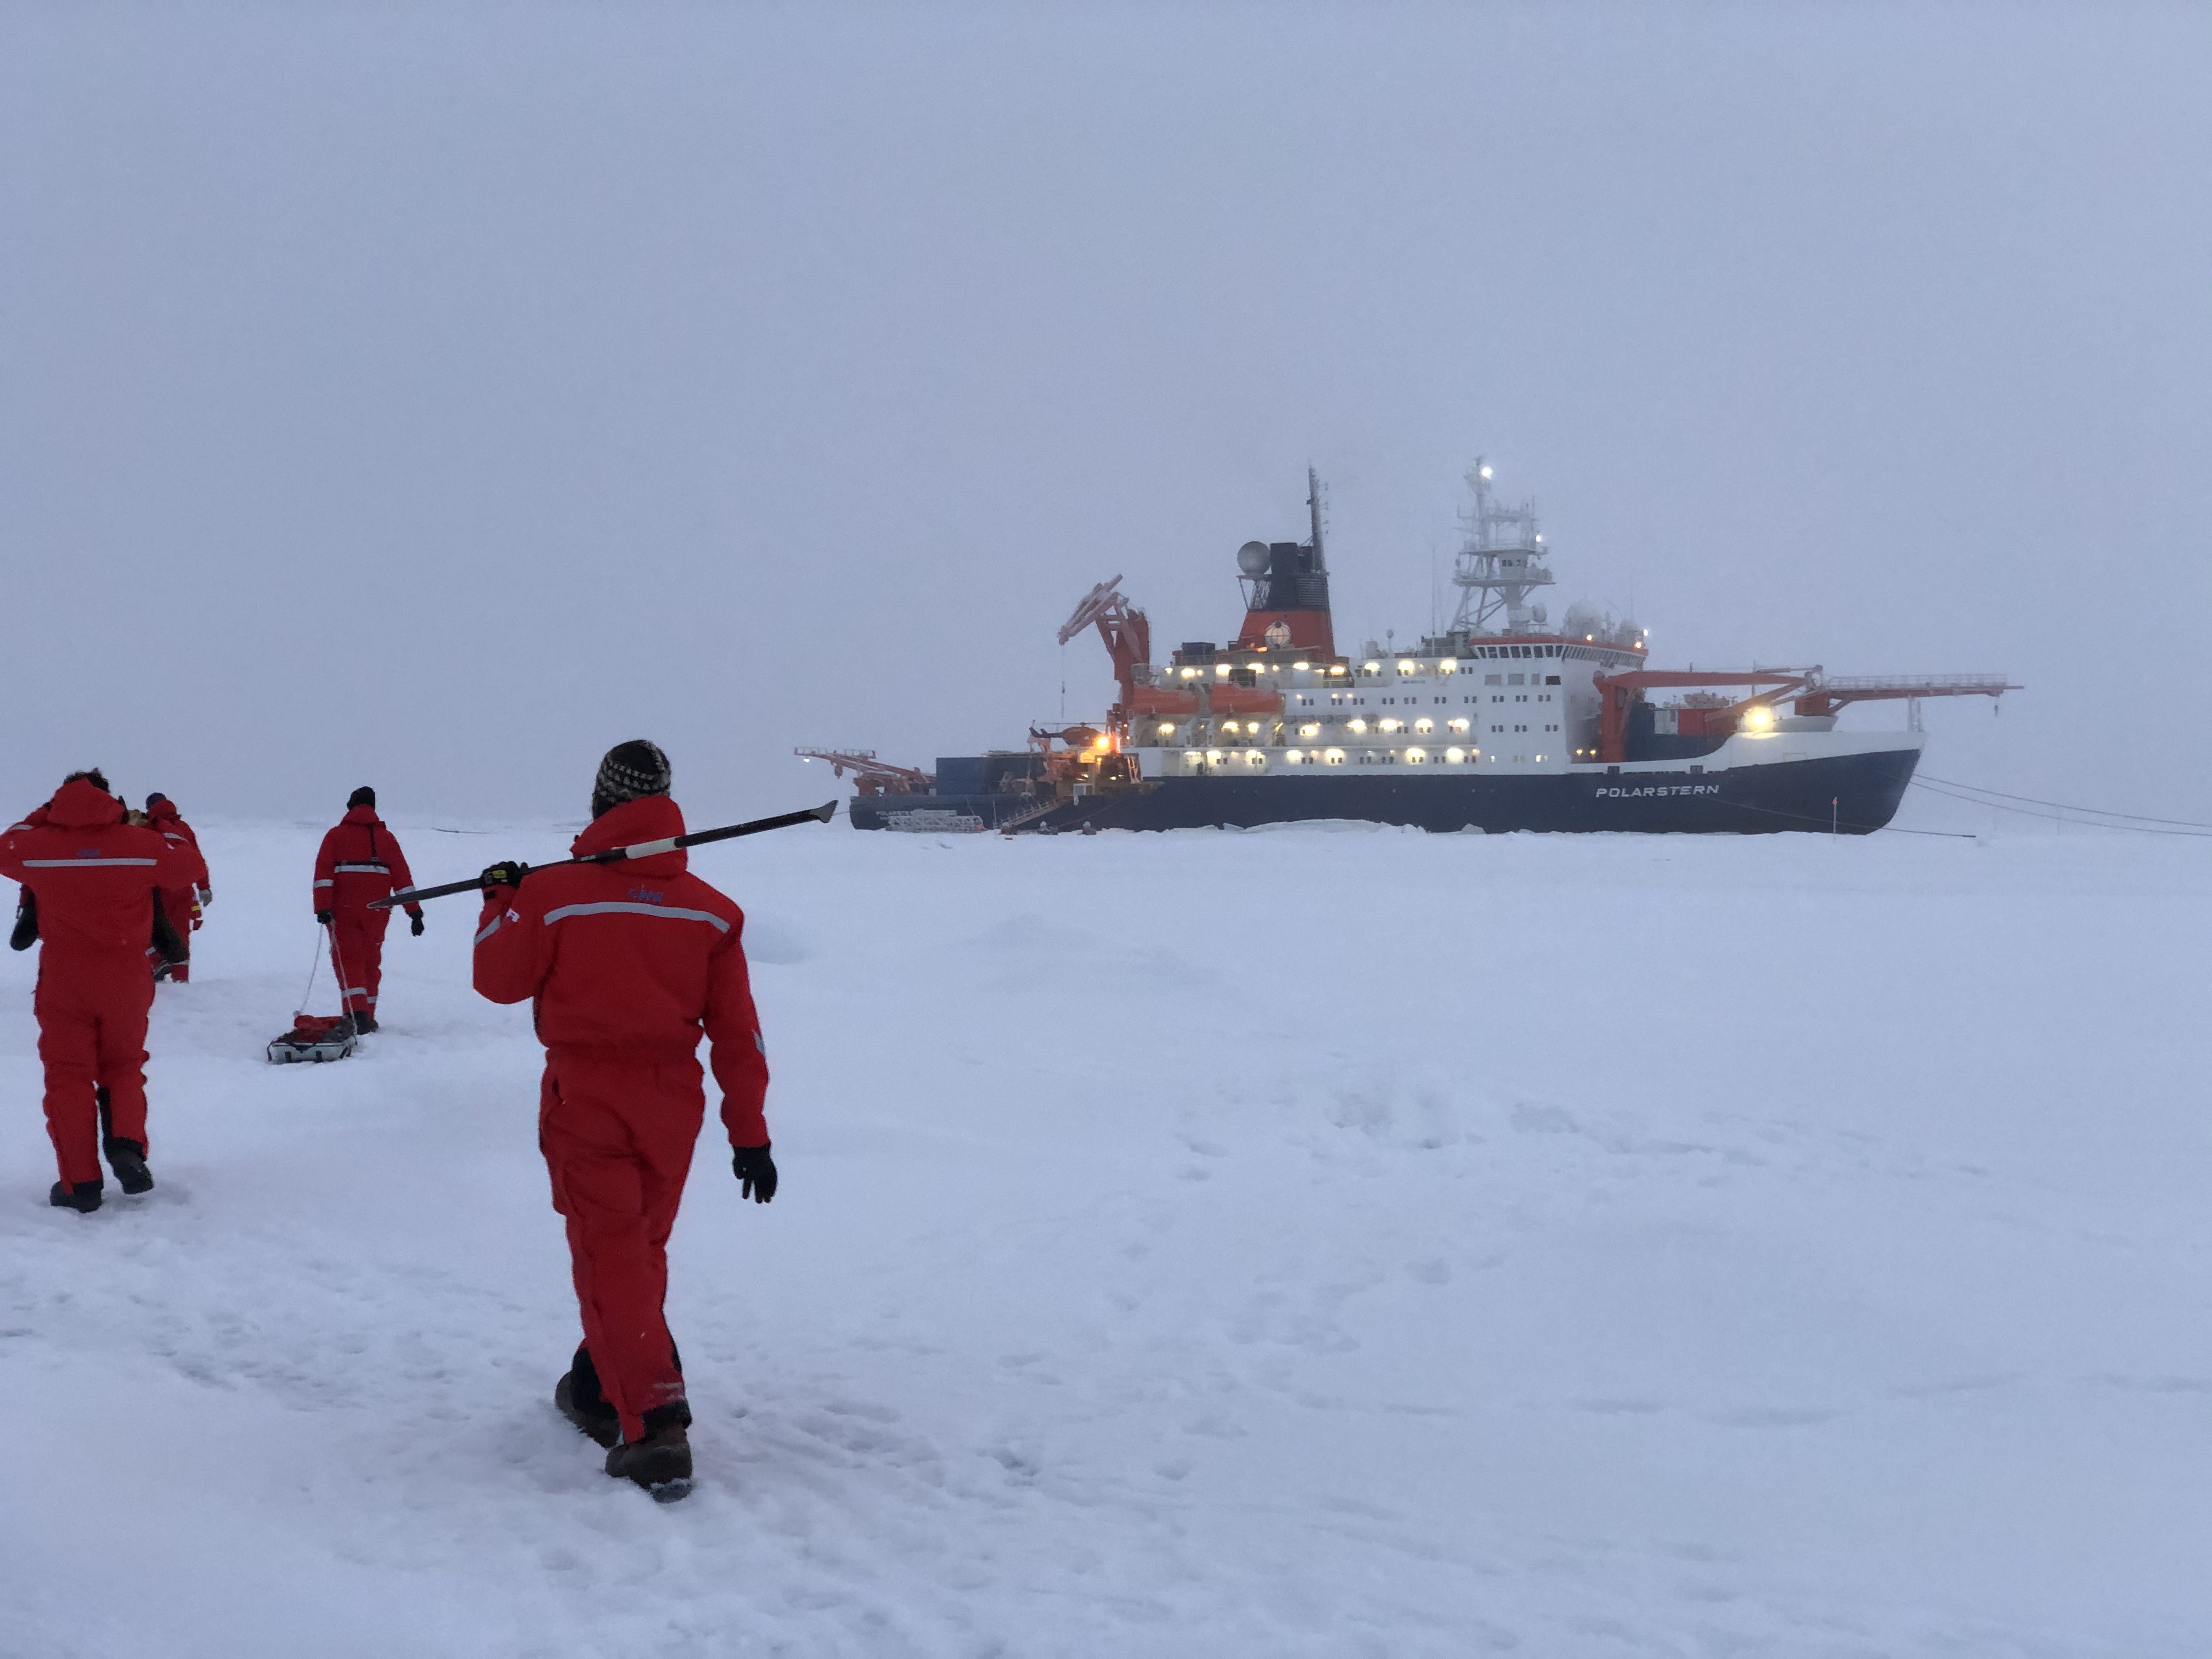 Scientists and technicians trudge through snow and ice in the central Arctic with the icebreaker Polarstern in the distance.